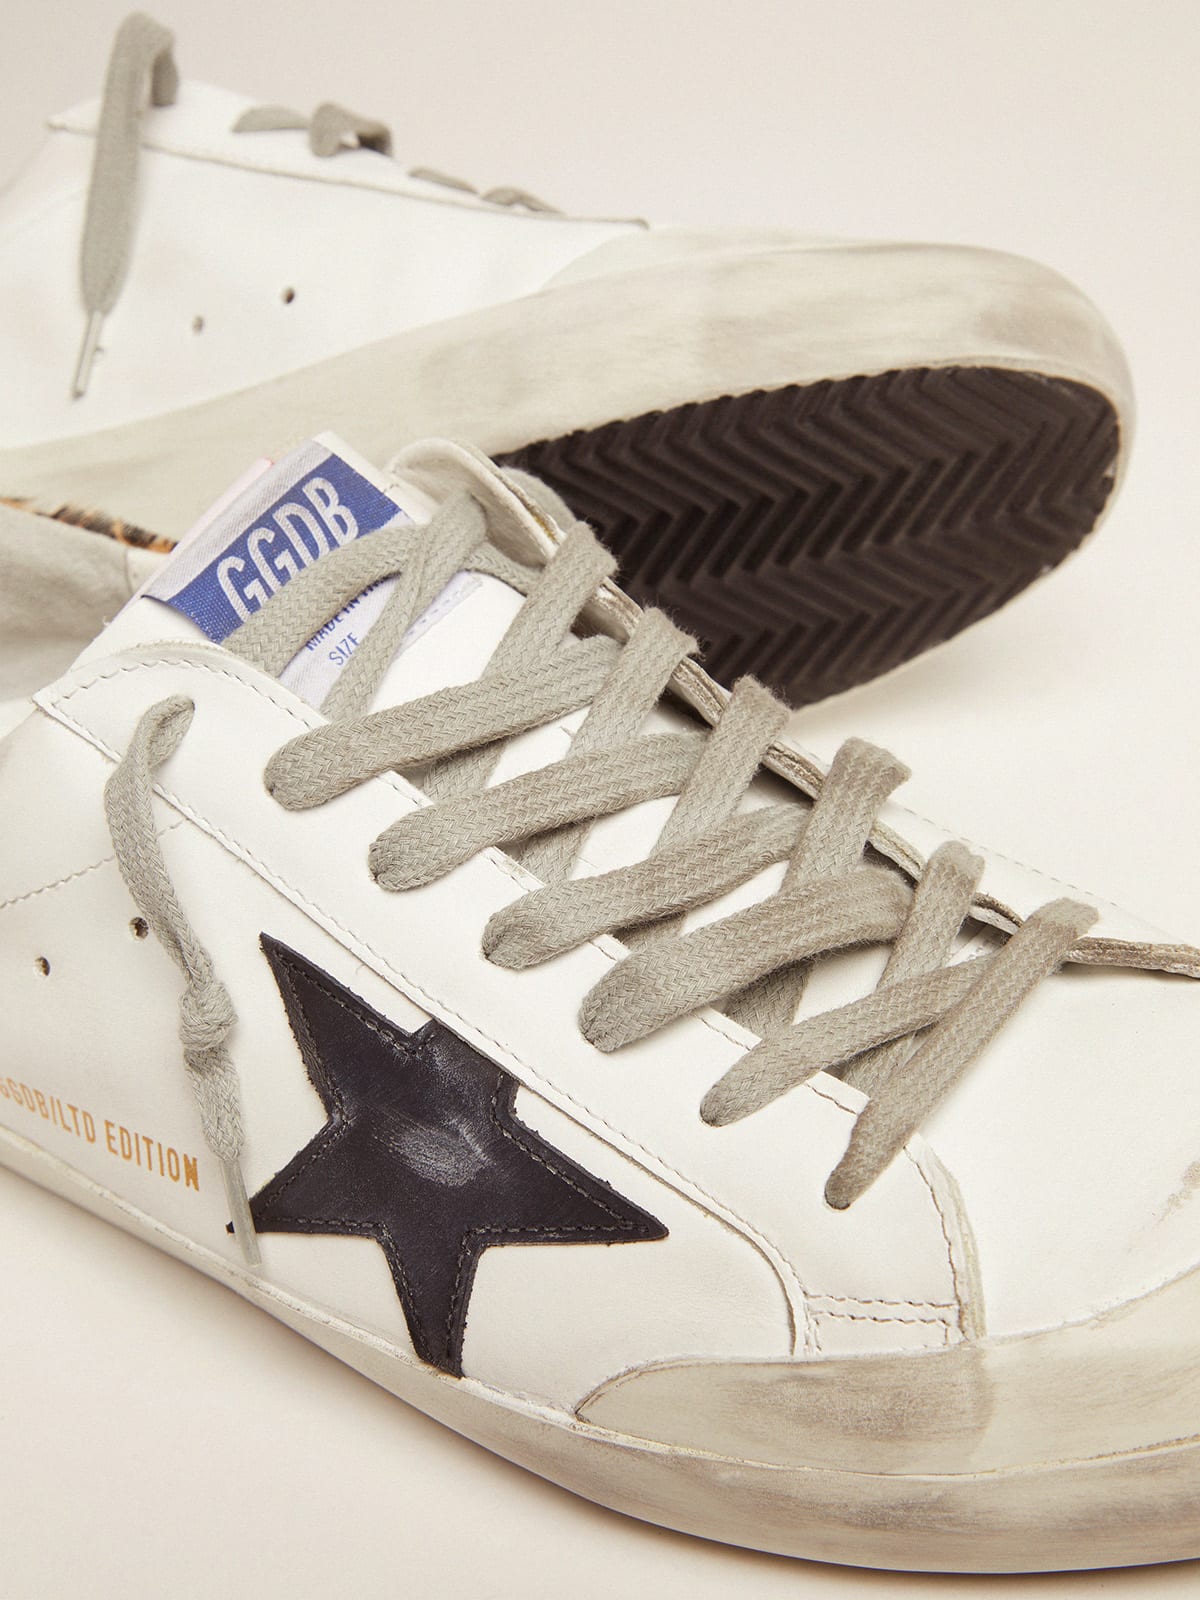 Golden Goose - Men's Limited Edition LAB Super-Star sneakers with leopard-print heel tab in 